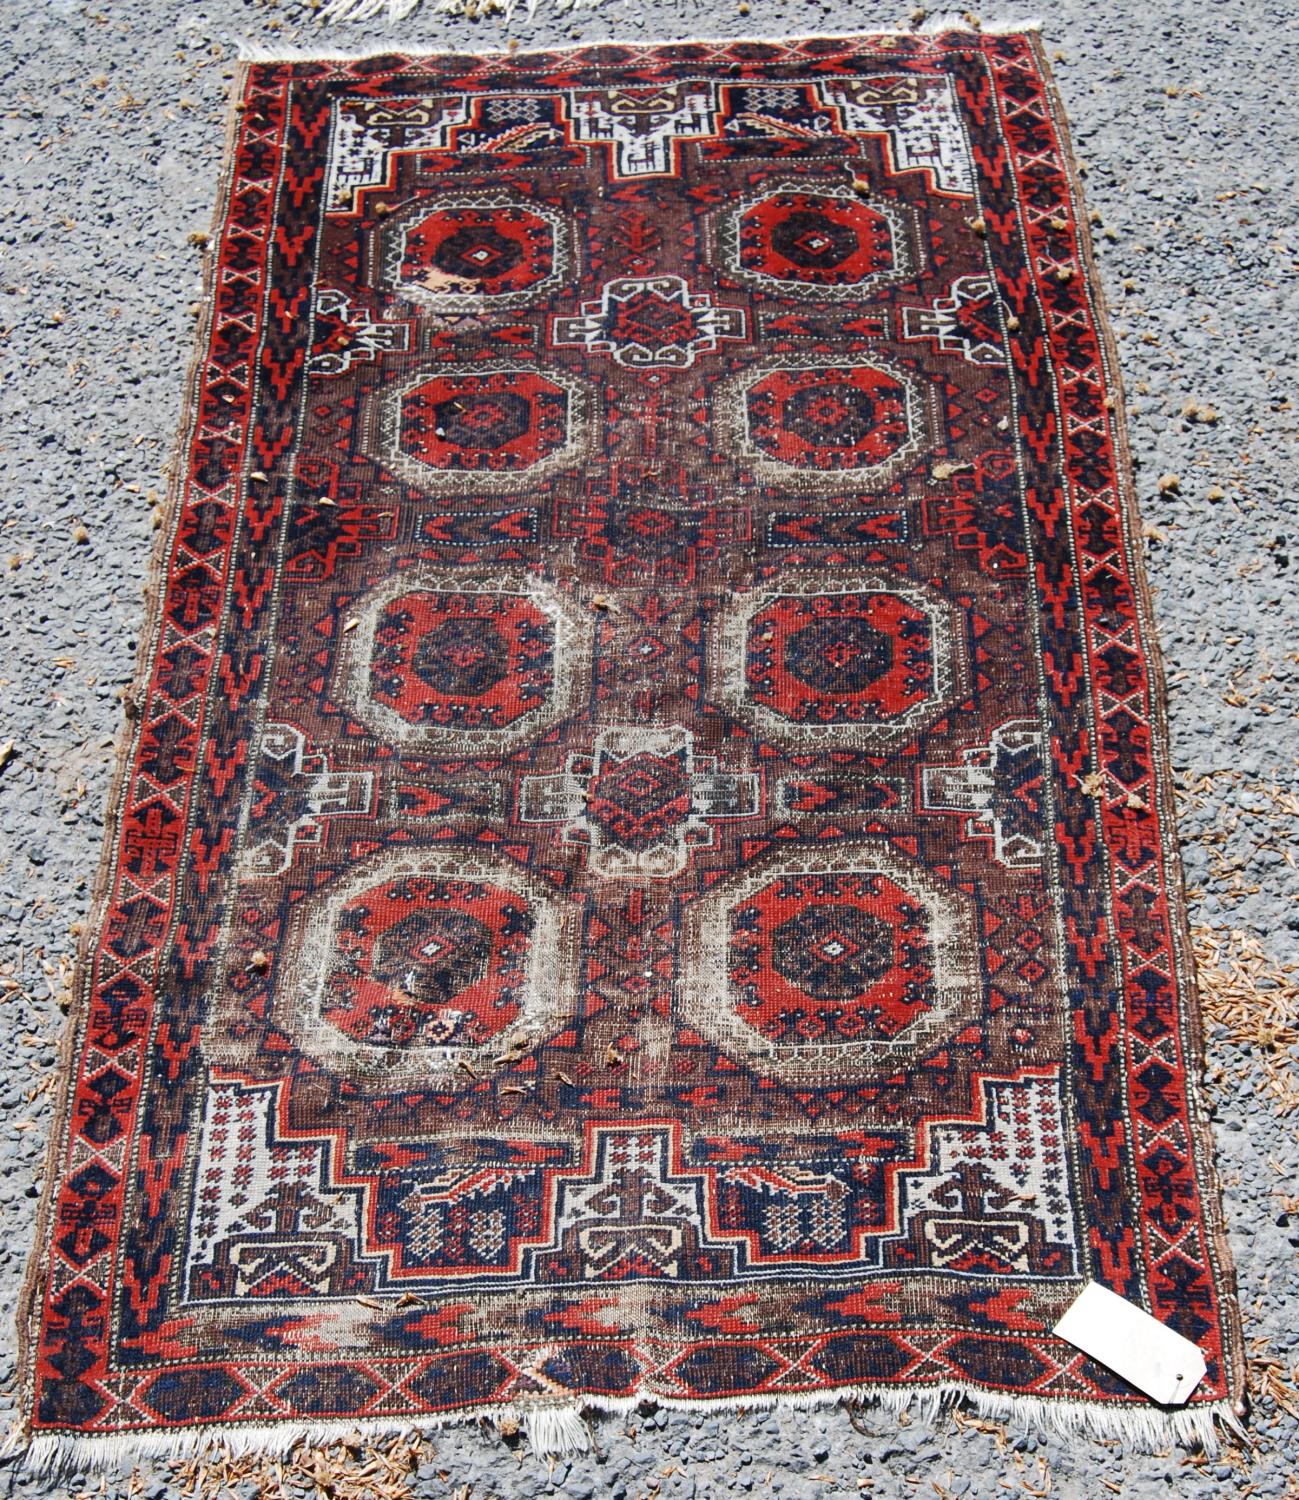 Afghan rug with two rows of four guls, spandrels over brown ground, 146cm x 82cm.